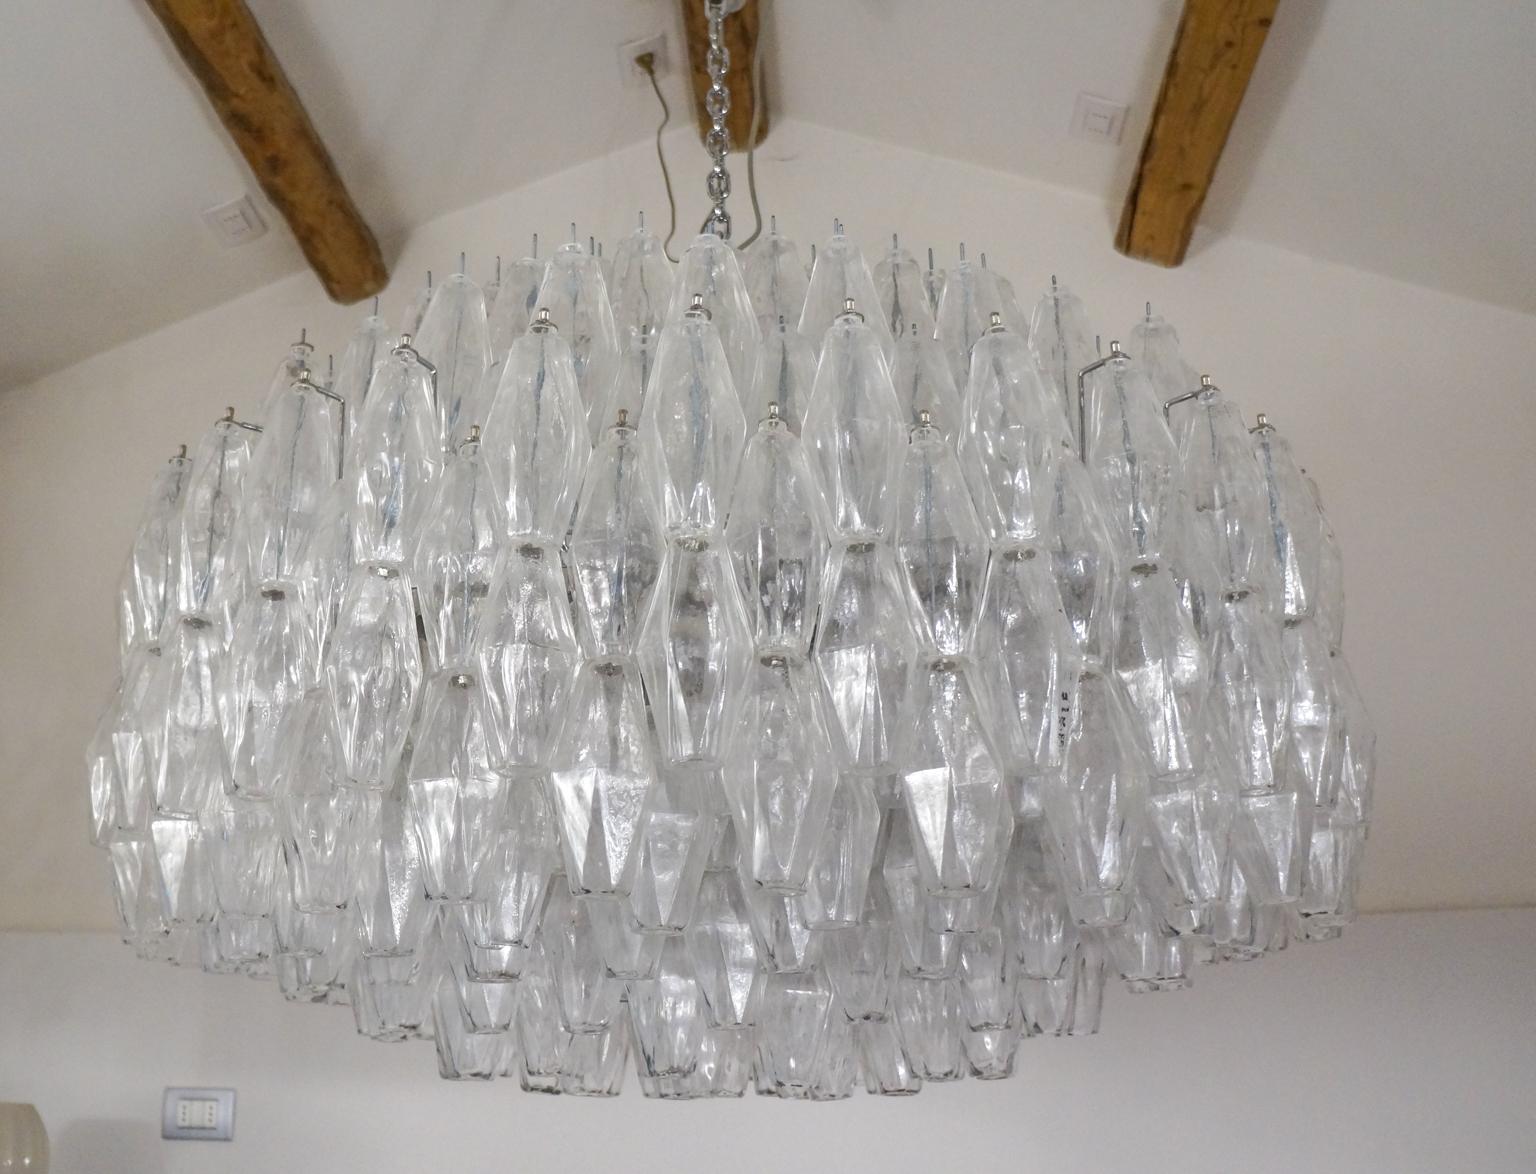 Hand-Crafted Alberto Donà Mid-Century Modern Crystal Murano Glass Poliedri Chandelier, 1985 For Sale